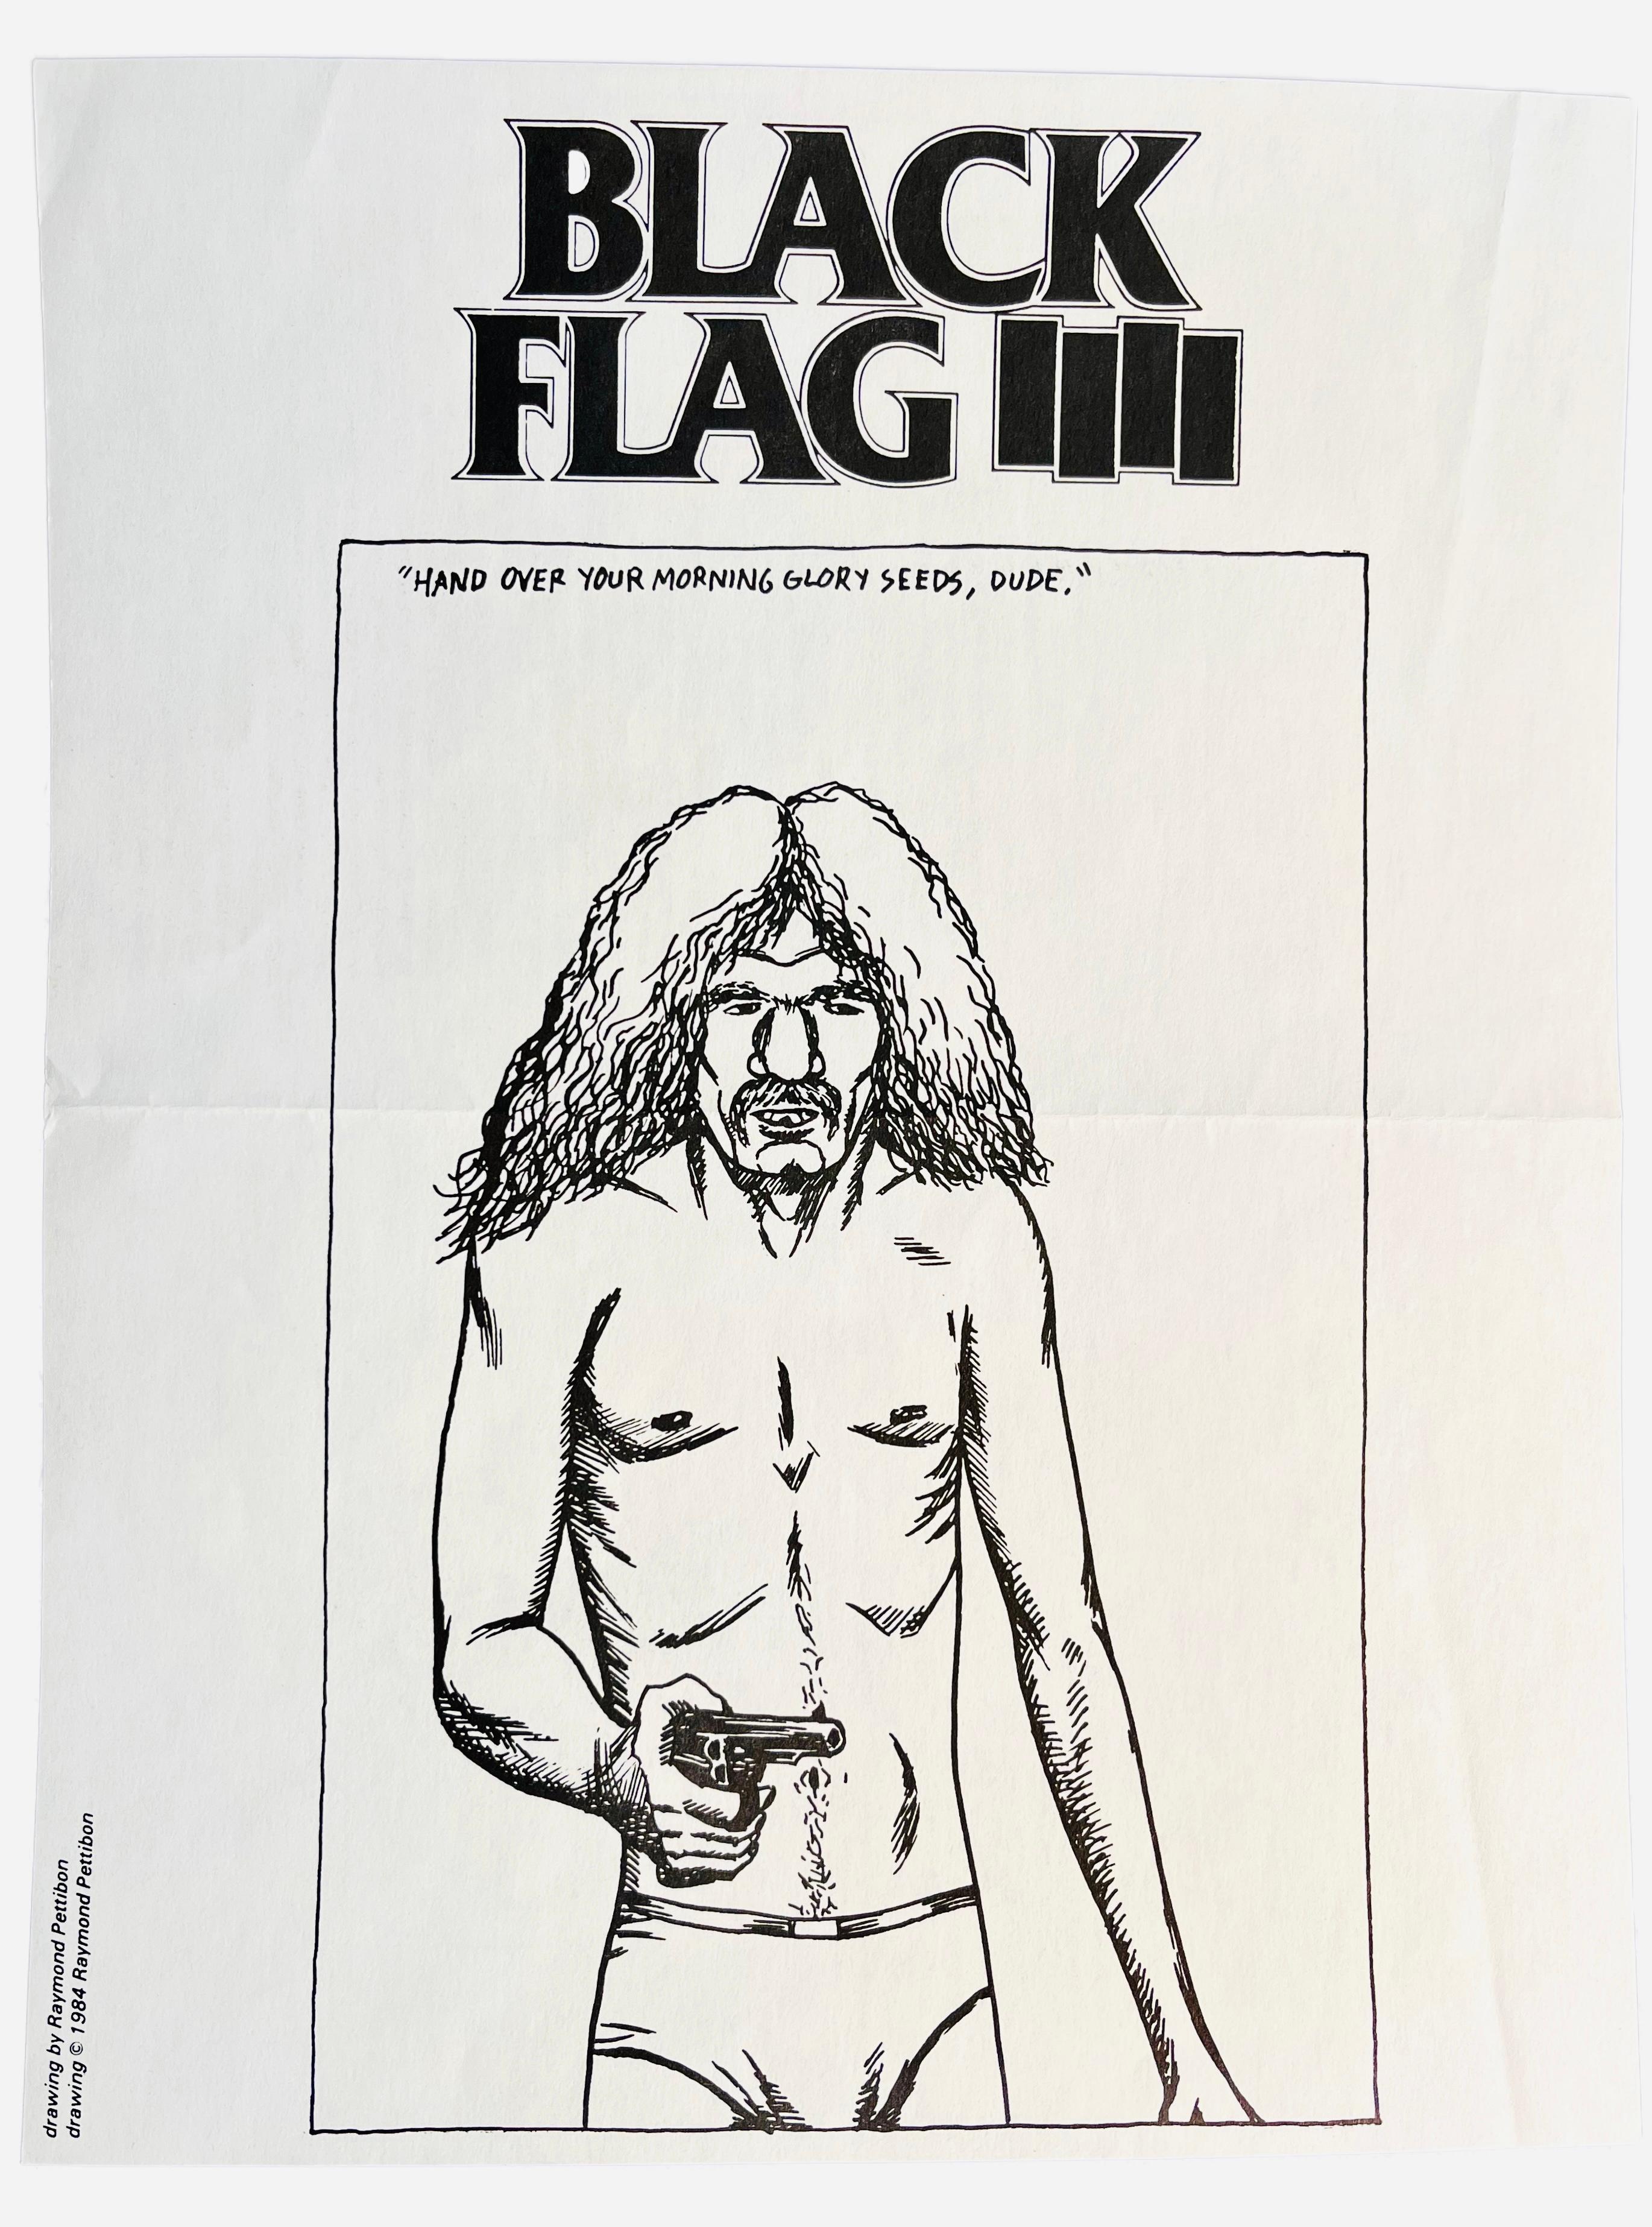 Raymond Pettibon Black Flag Live 1985:
Rare folding double-sided promotional tour flyer illustrated by Raymond Pettibon for SST Records, advertising 1985 Black Flag concert dates.

Off-set printed; 8.5 x 11 inches folded closed (opening to 11x17